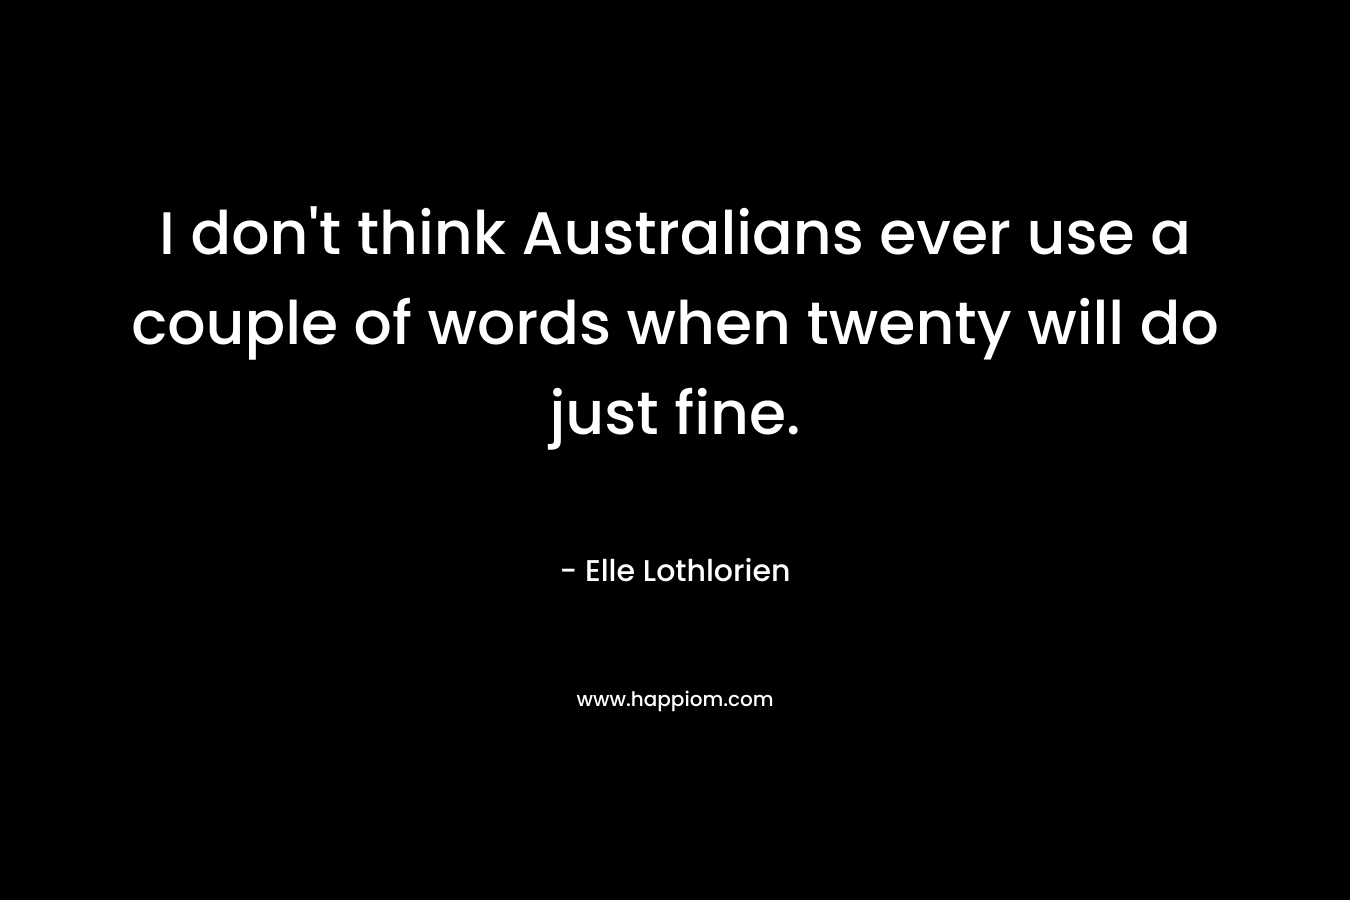 I don't think Australians ever use a couple of words when twenty will do just fine.